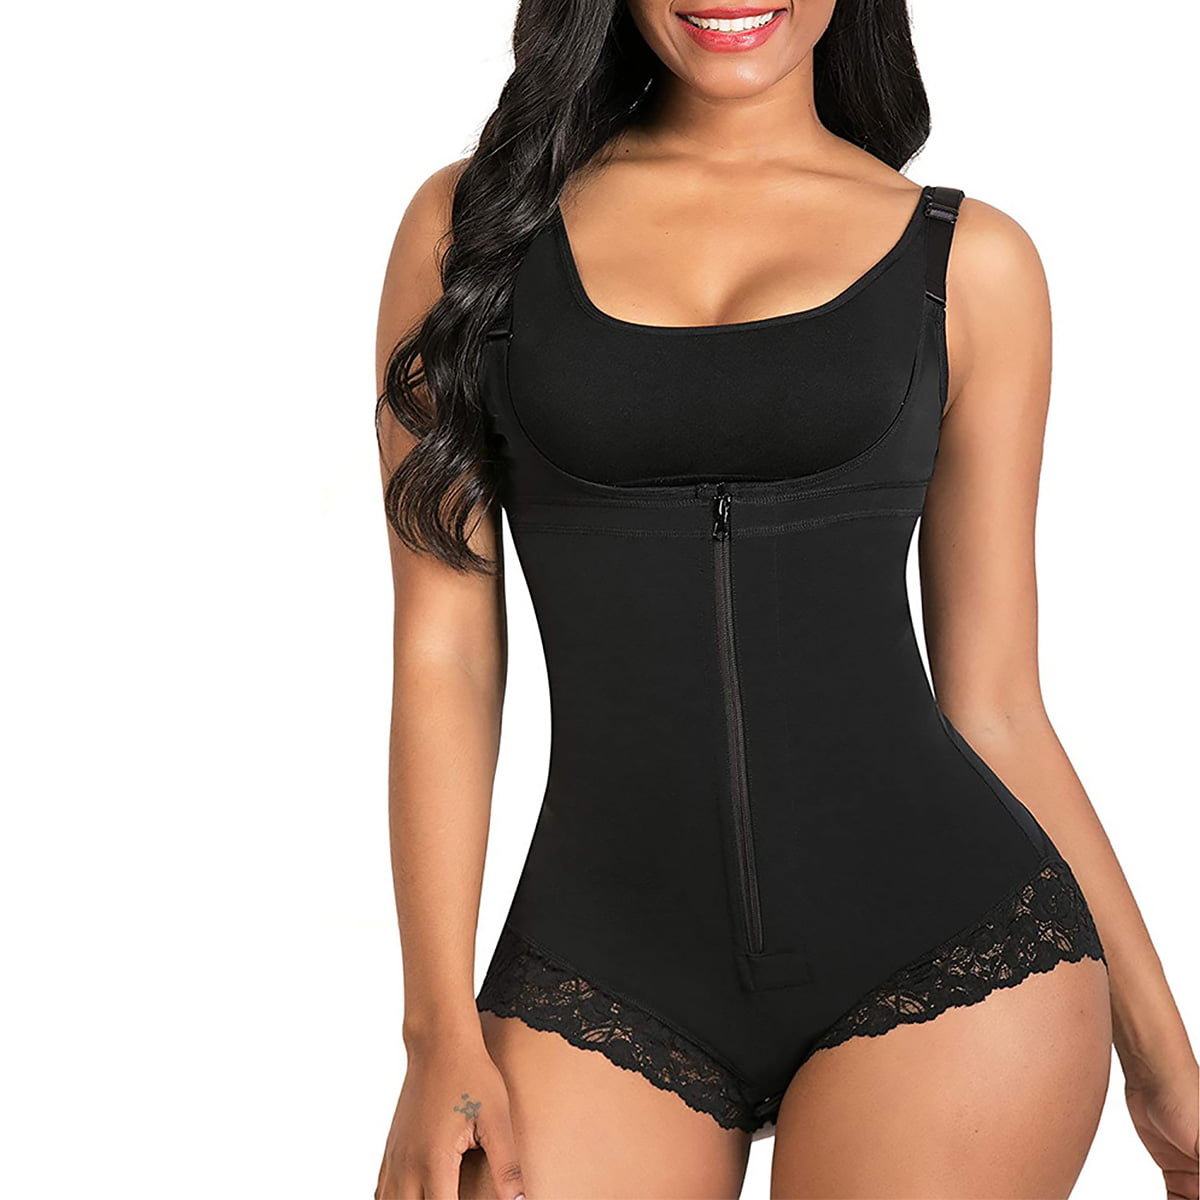 Details about   FAJAS REDUCTORAS COLOMBIANAS WAIST TRAINER VEST WEIGHT LOSS BODY SHAPER GIRDLE 